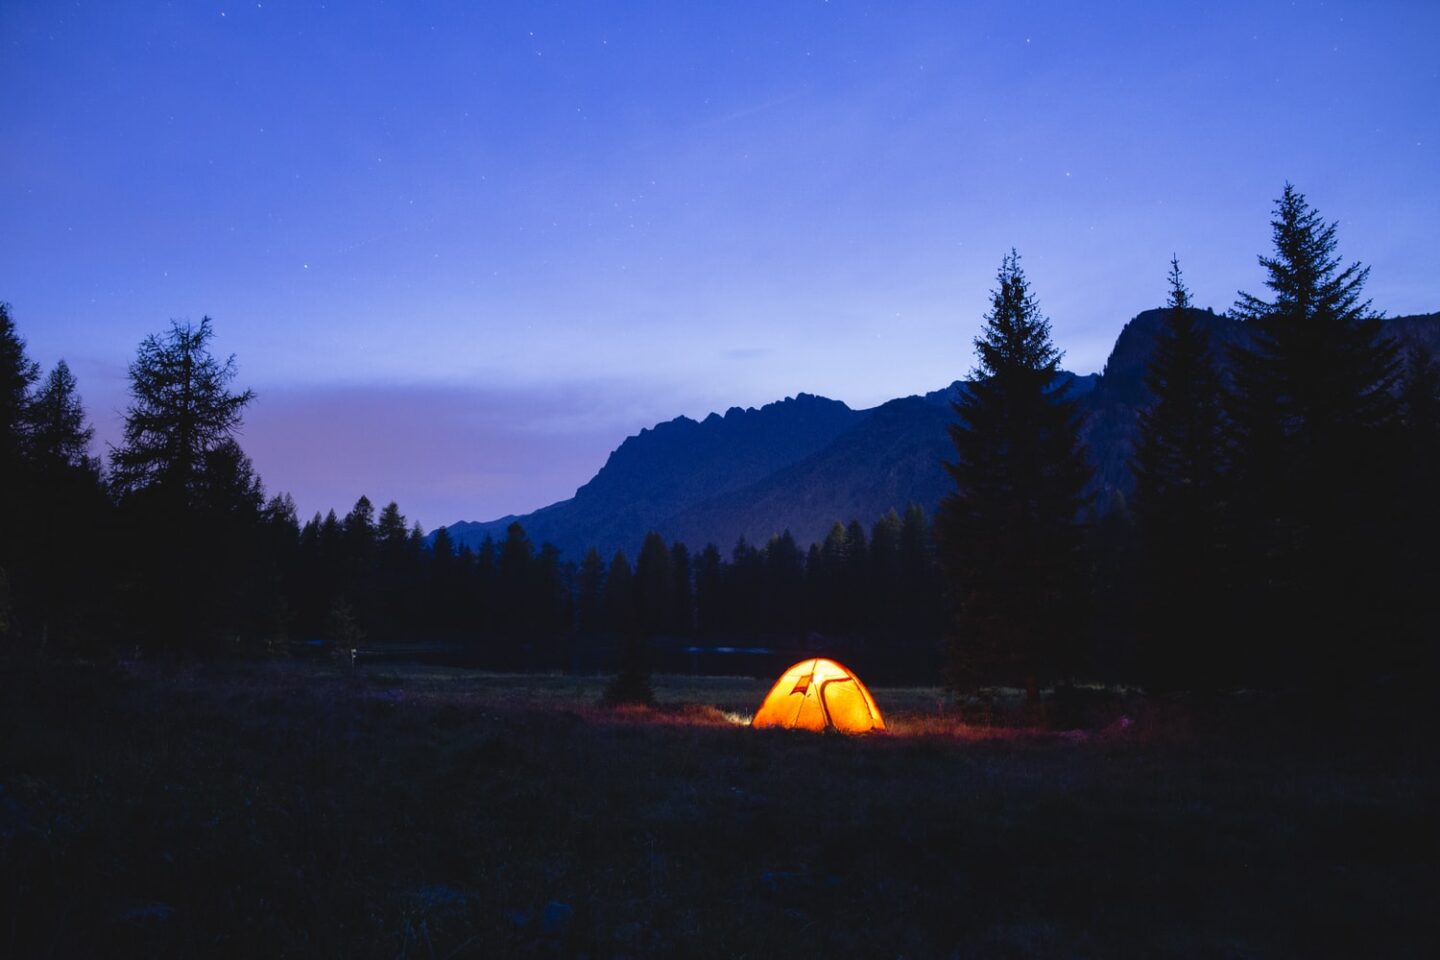 Tent glowing against the mountains during free camping at night.